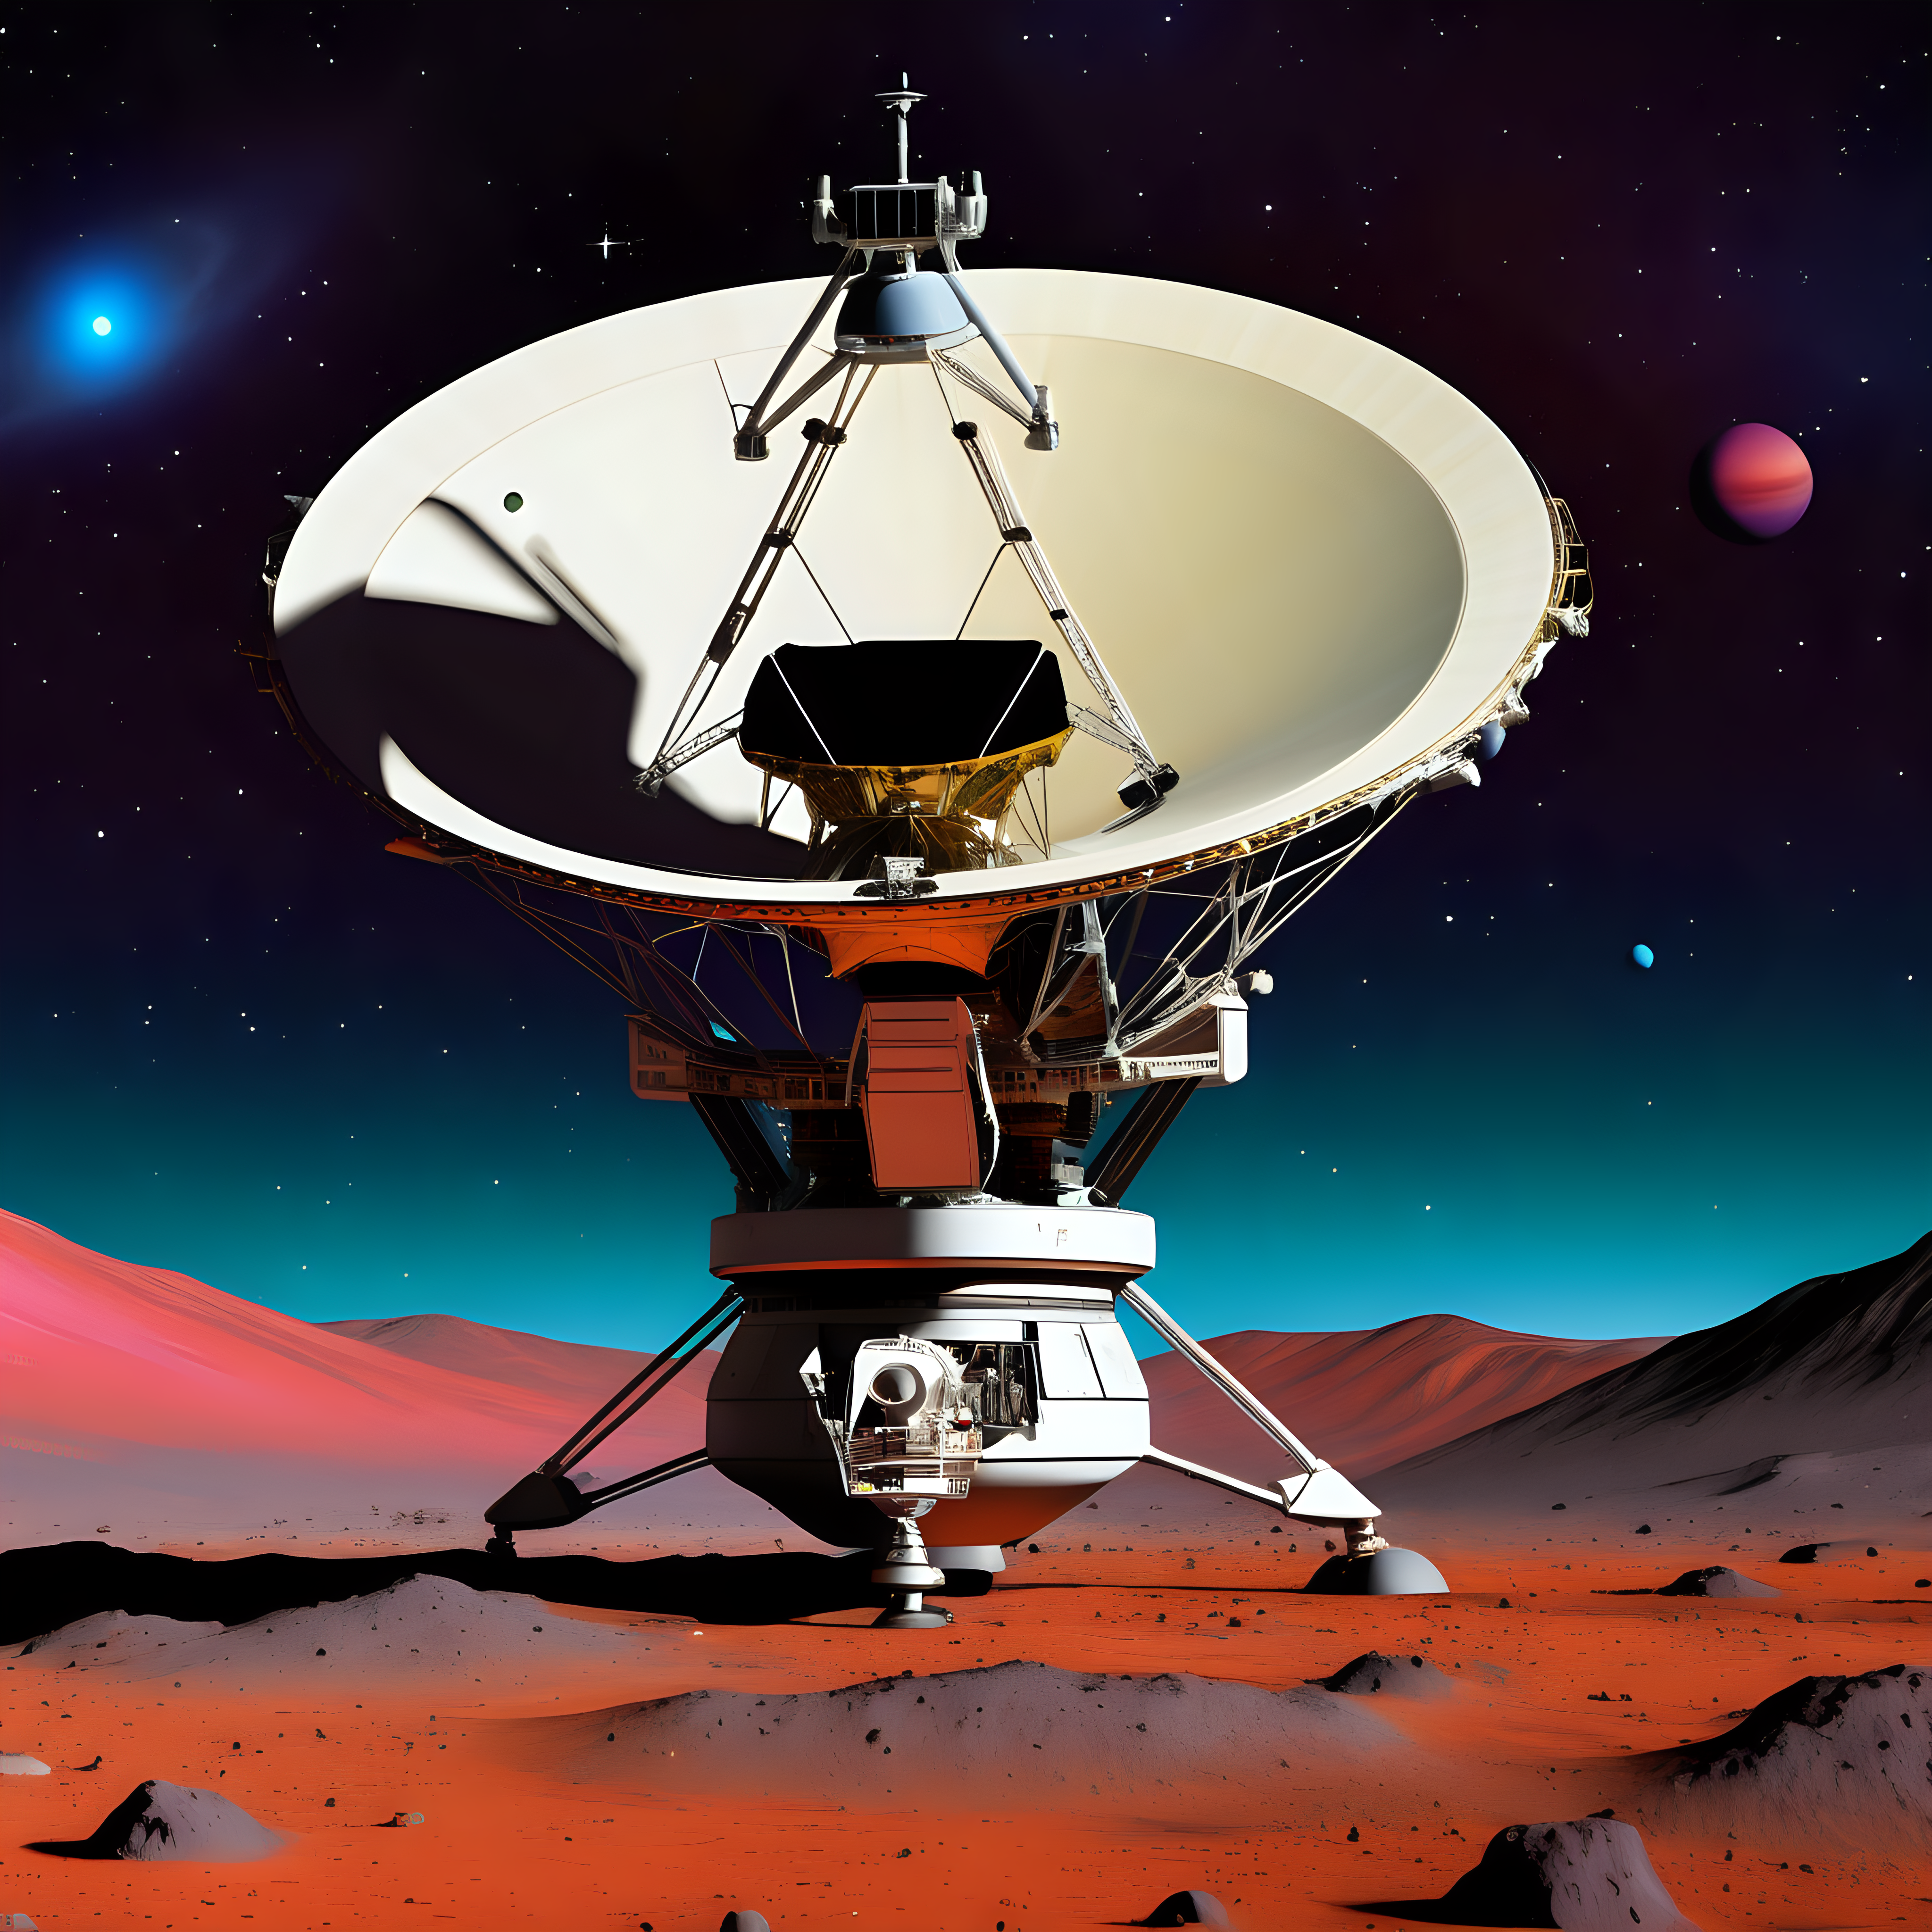 voyager 1 spacecraft in front of a vibrantly colored alien planet with s lot of stars in the background